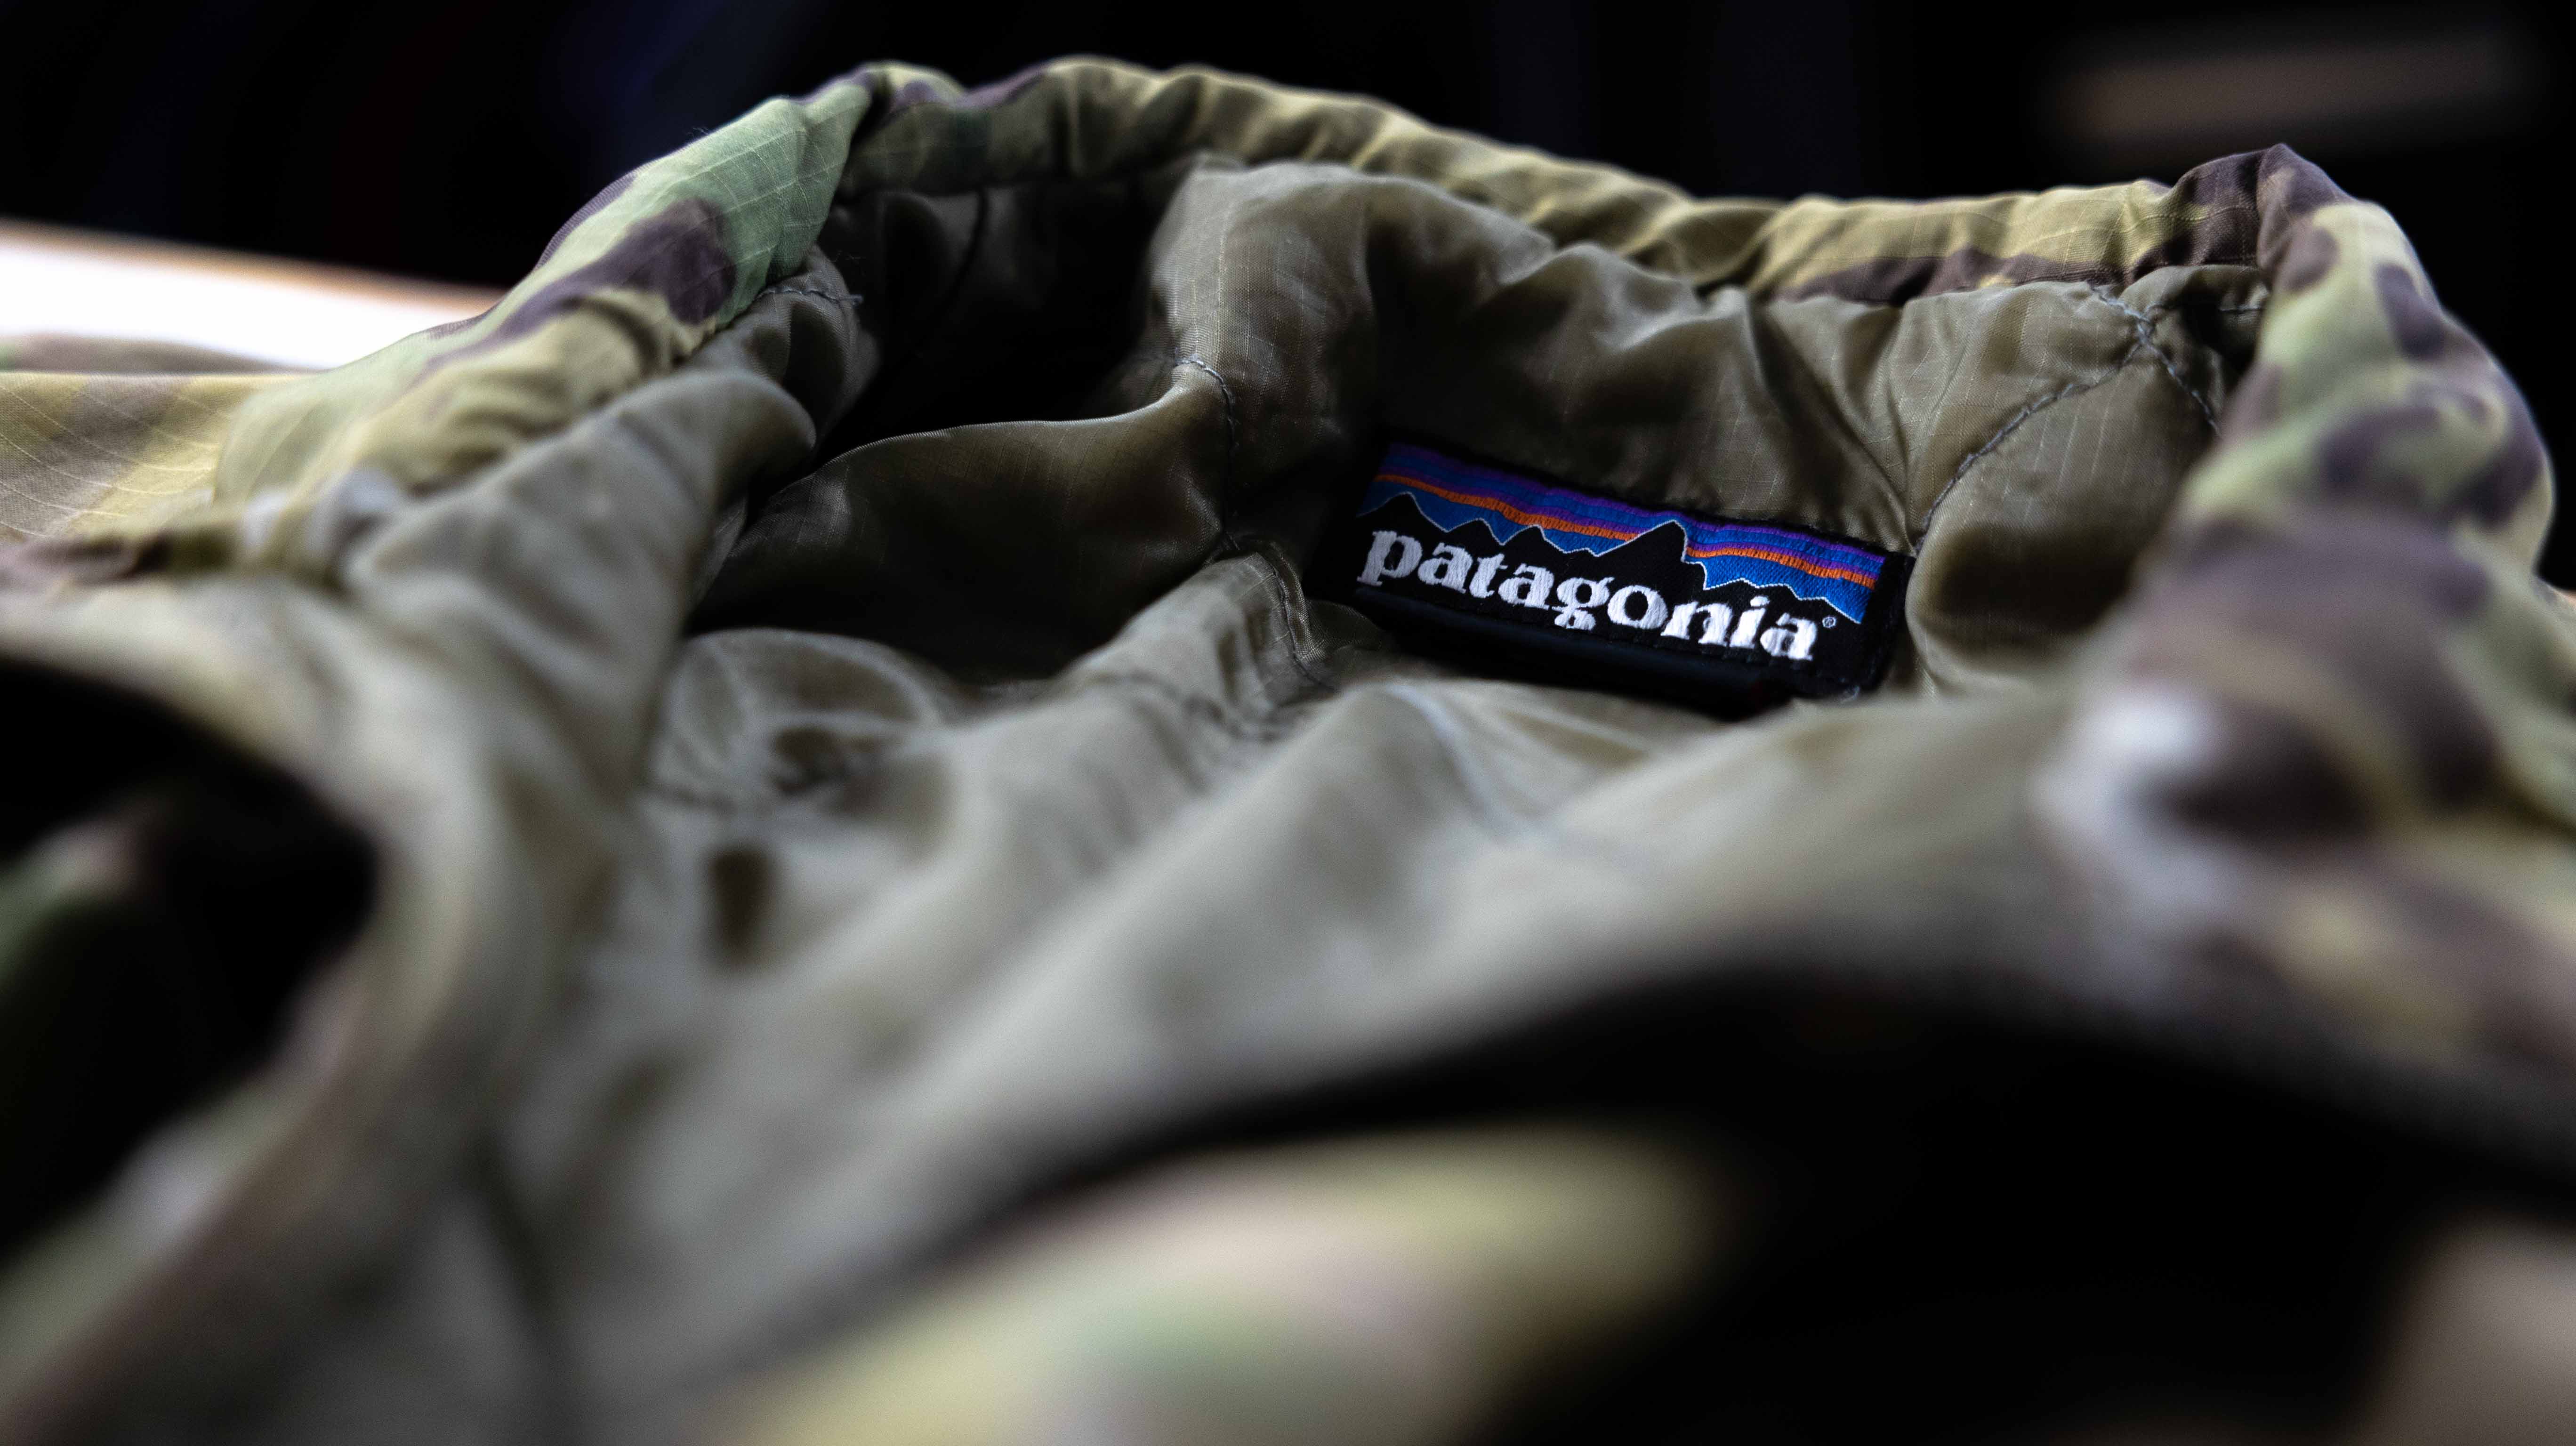 Patagonia Level 3A Jacket